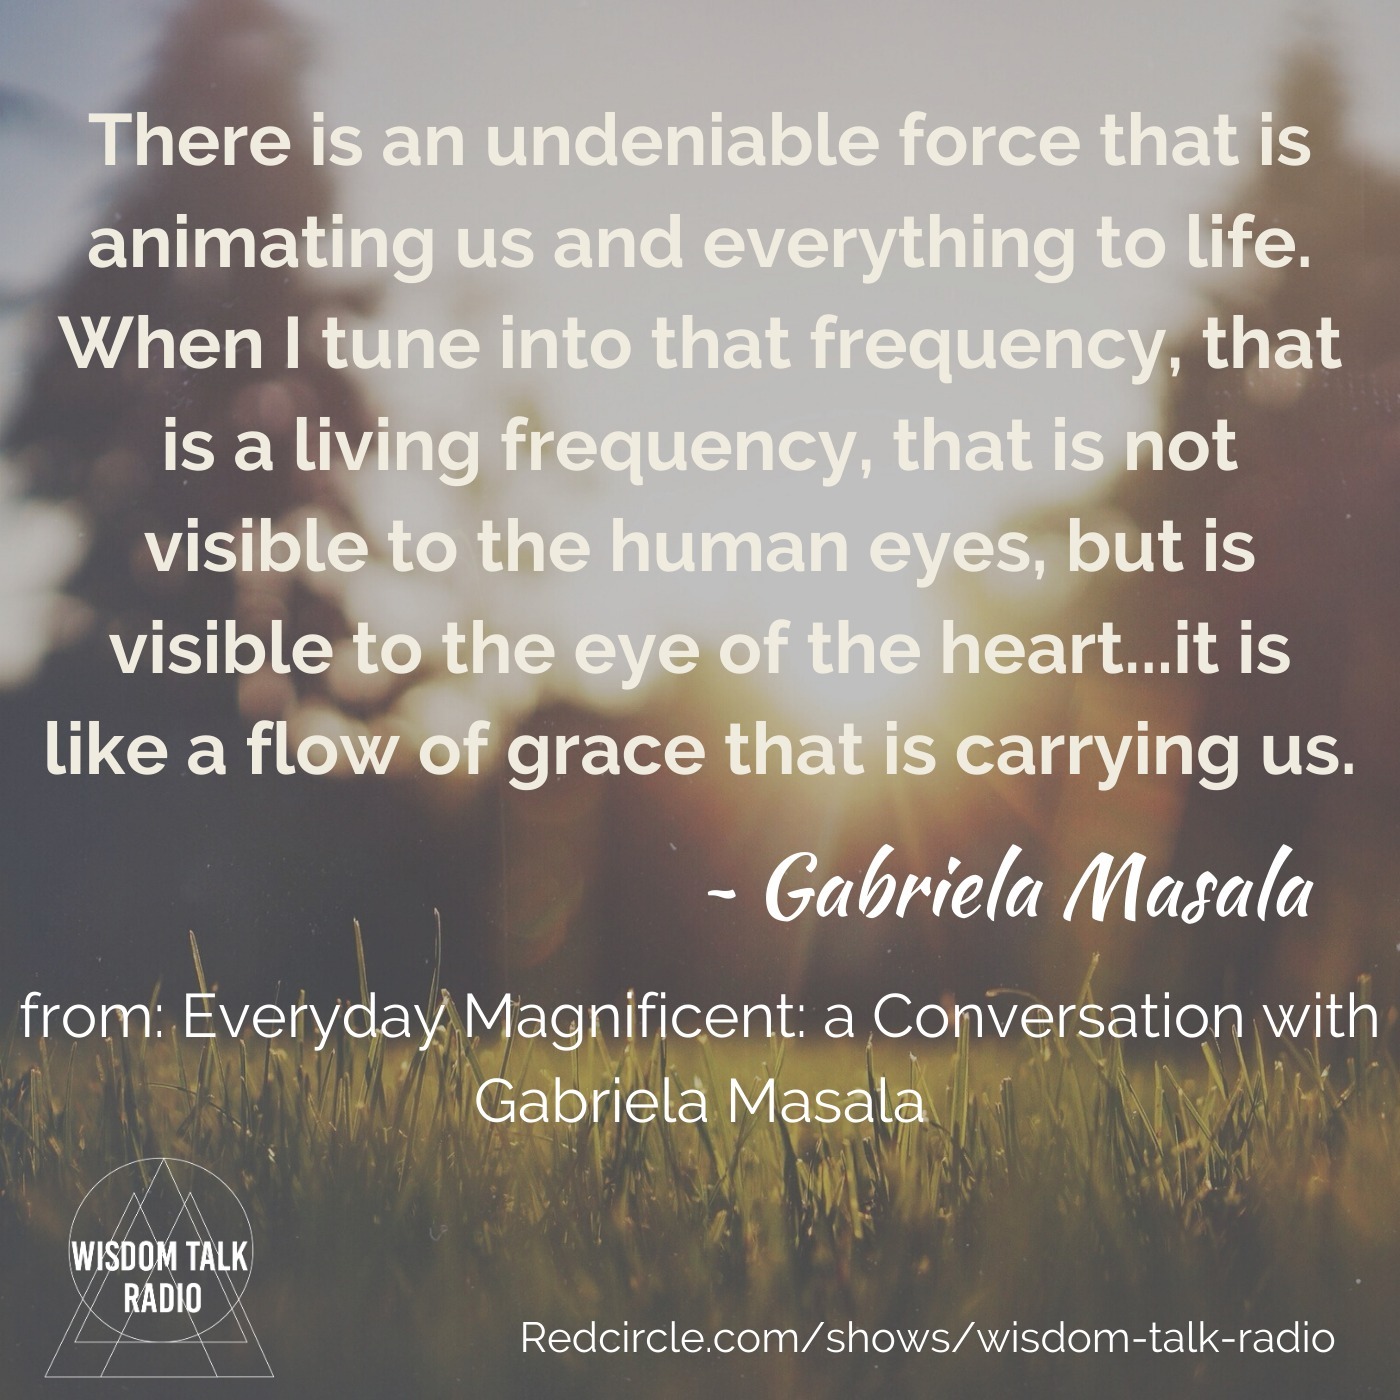 Everyday Magnificent: a Conversation with Gabriela Masala